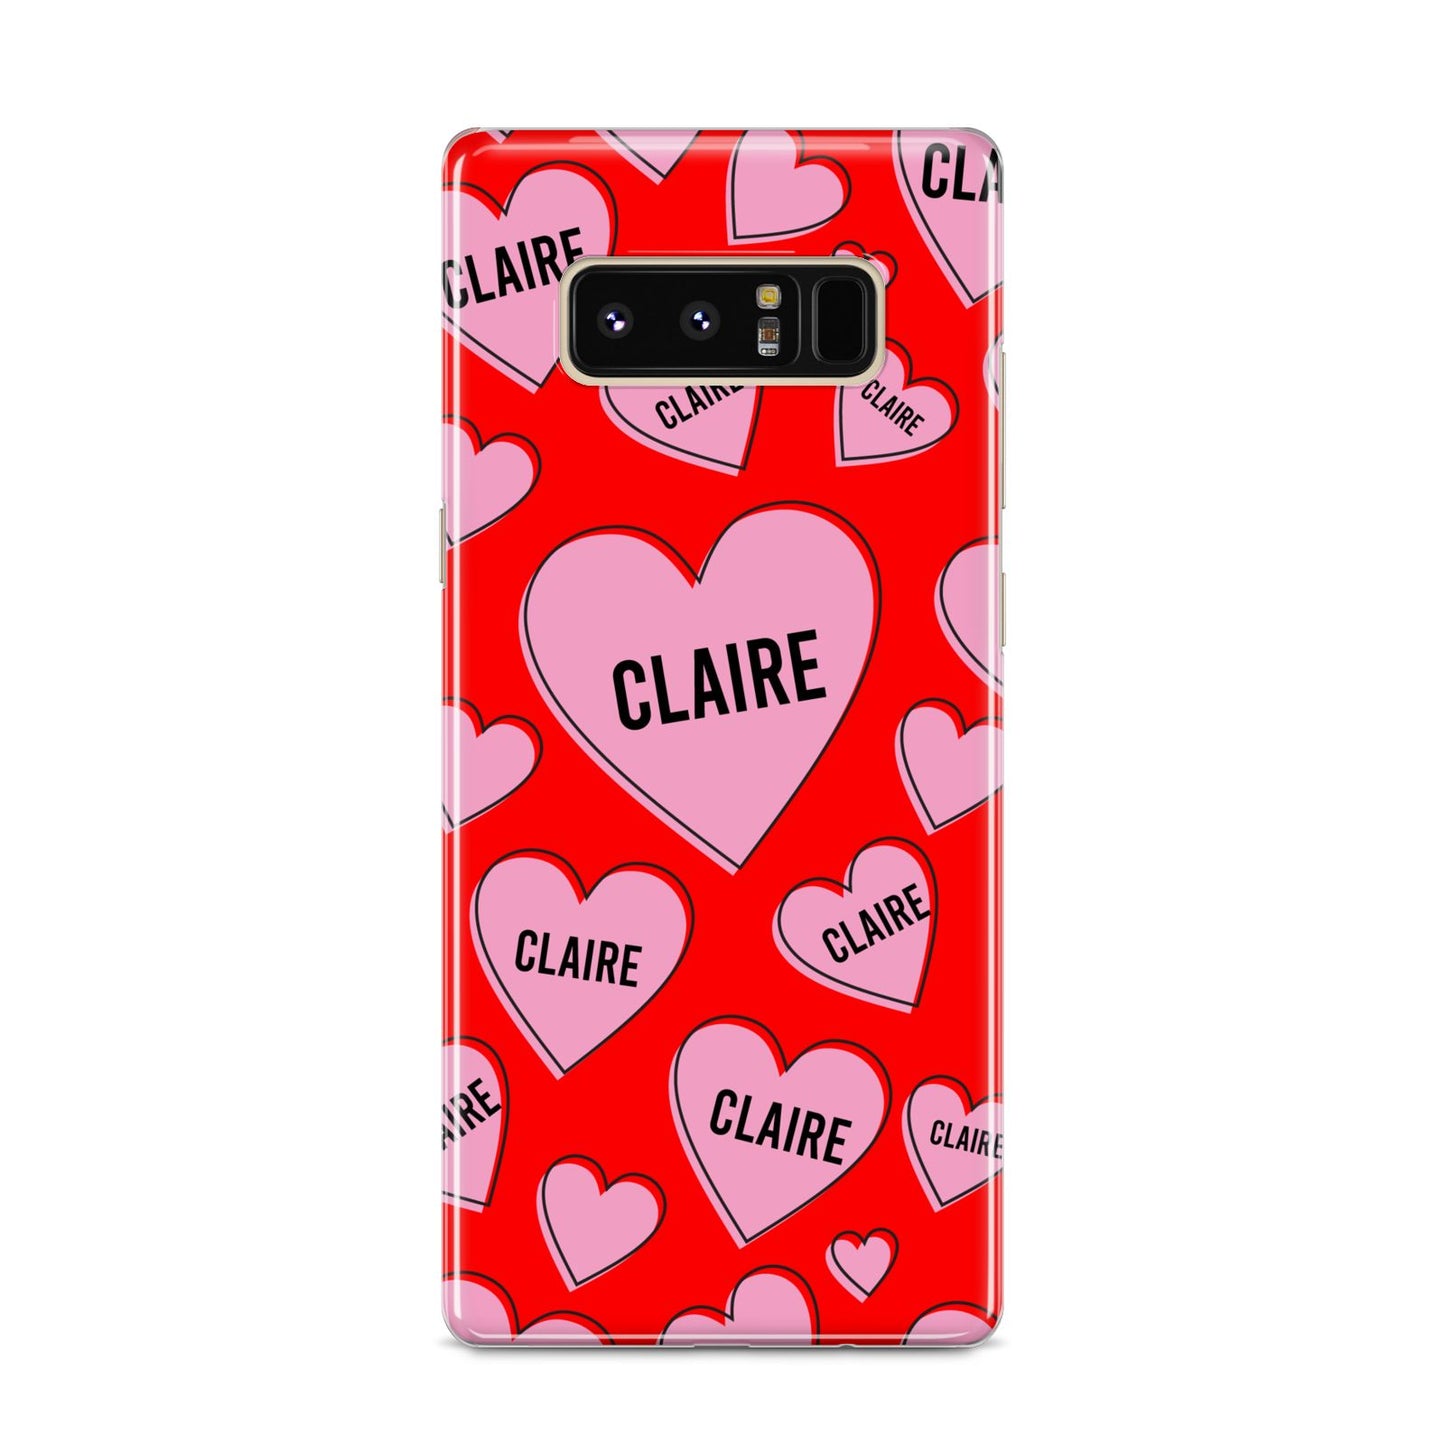 Personalised Hearts Samsung Galaxy S8 Case